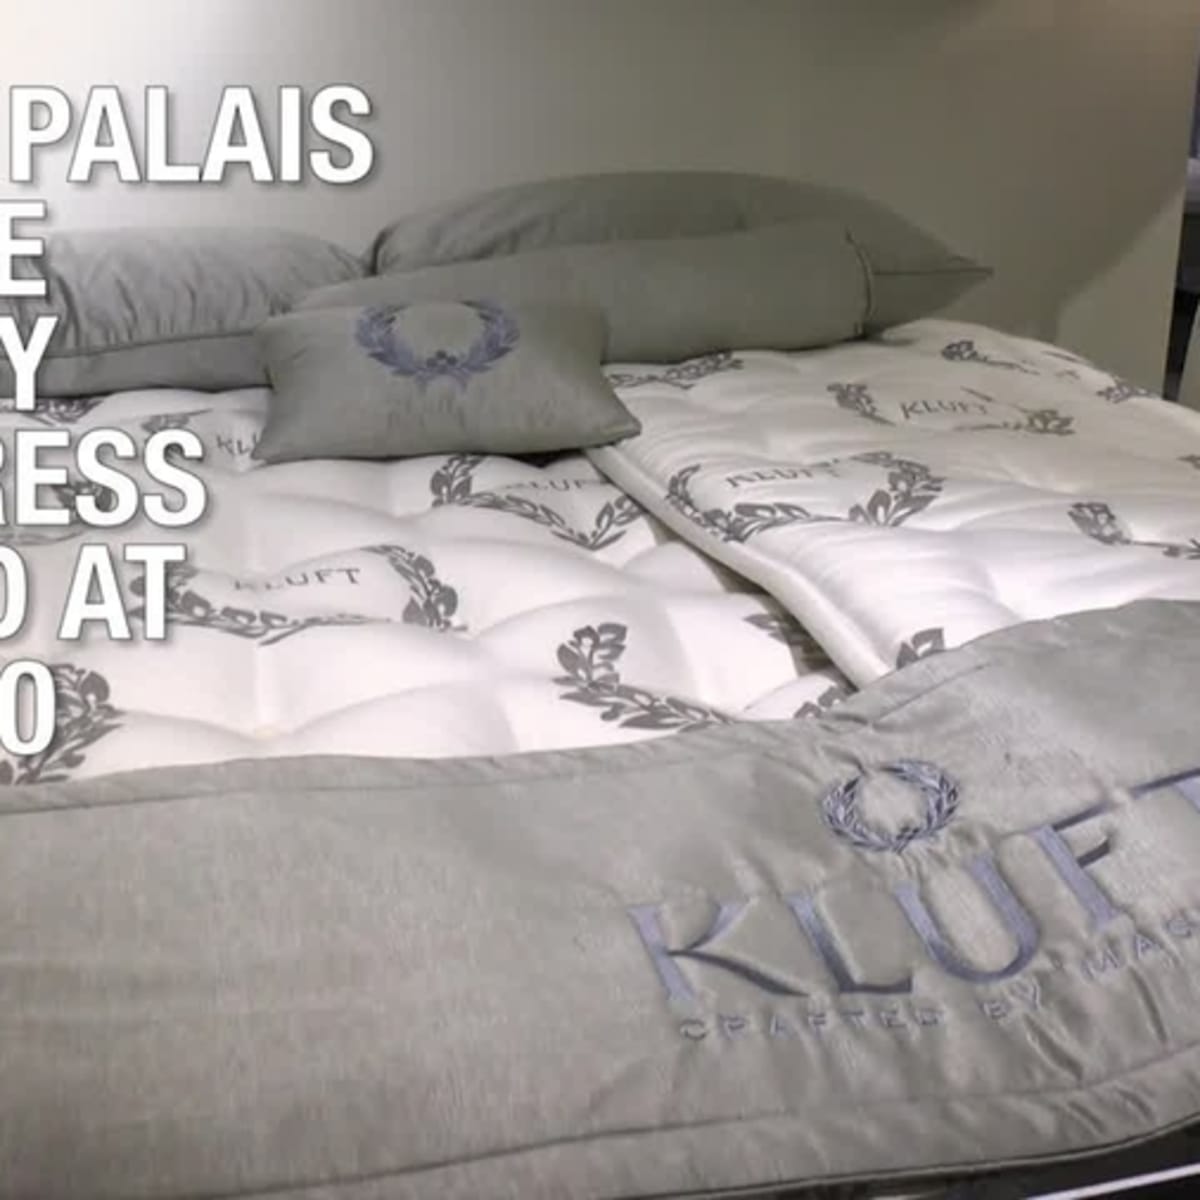 Why The 44k Palais Royale Mattress Is Really A Bargain Thestreet